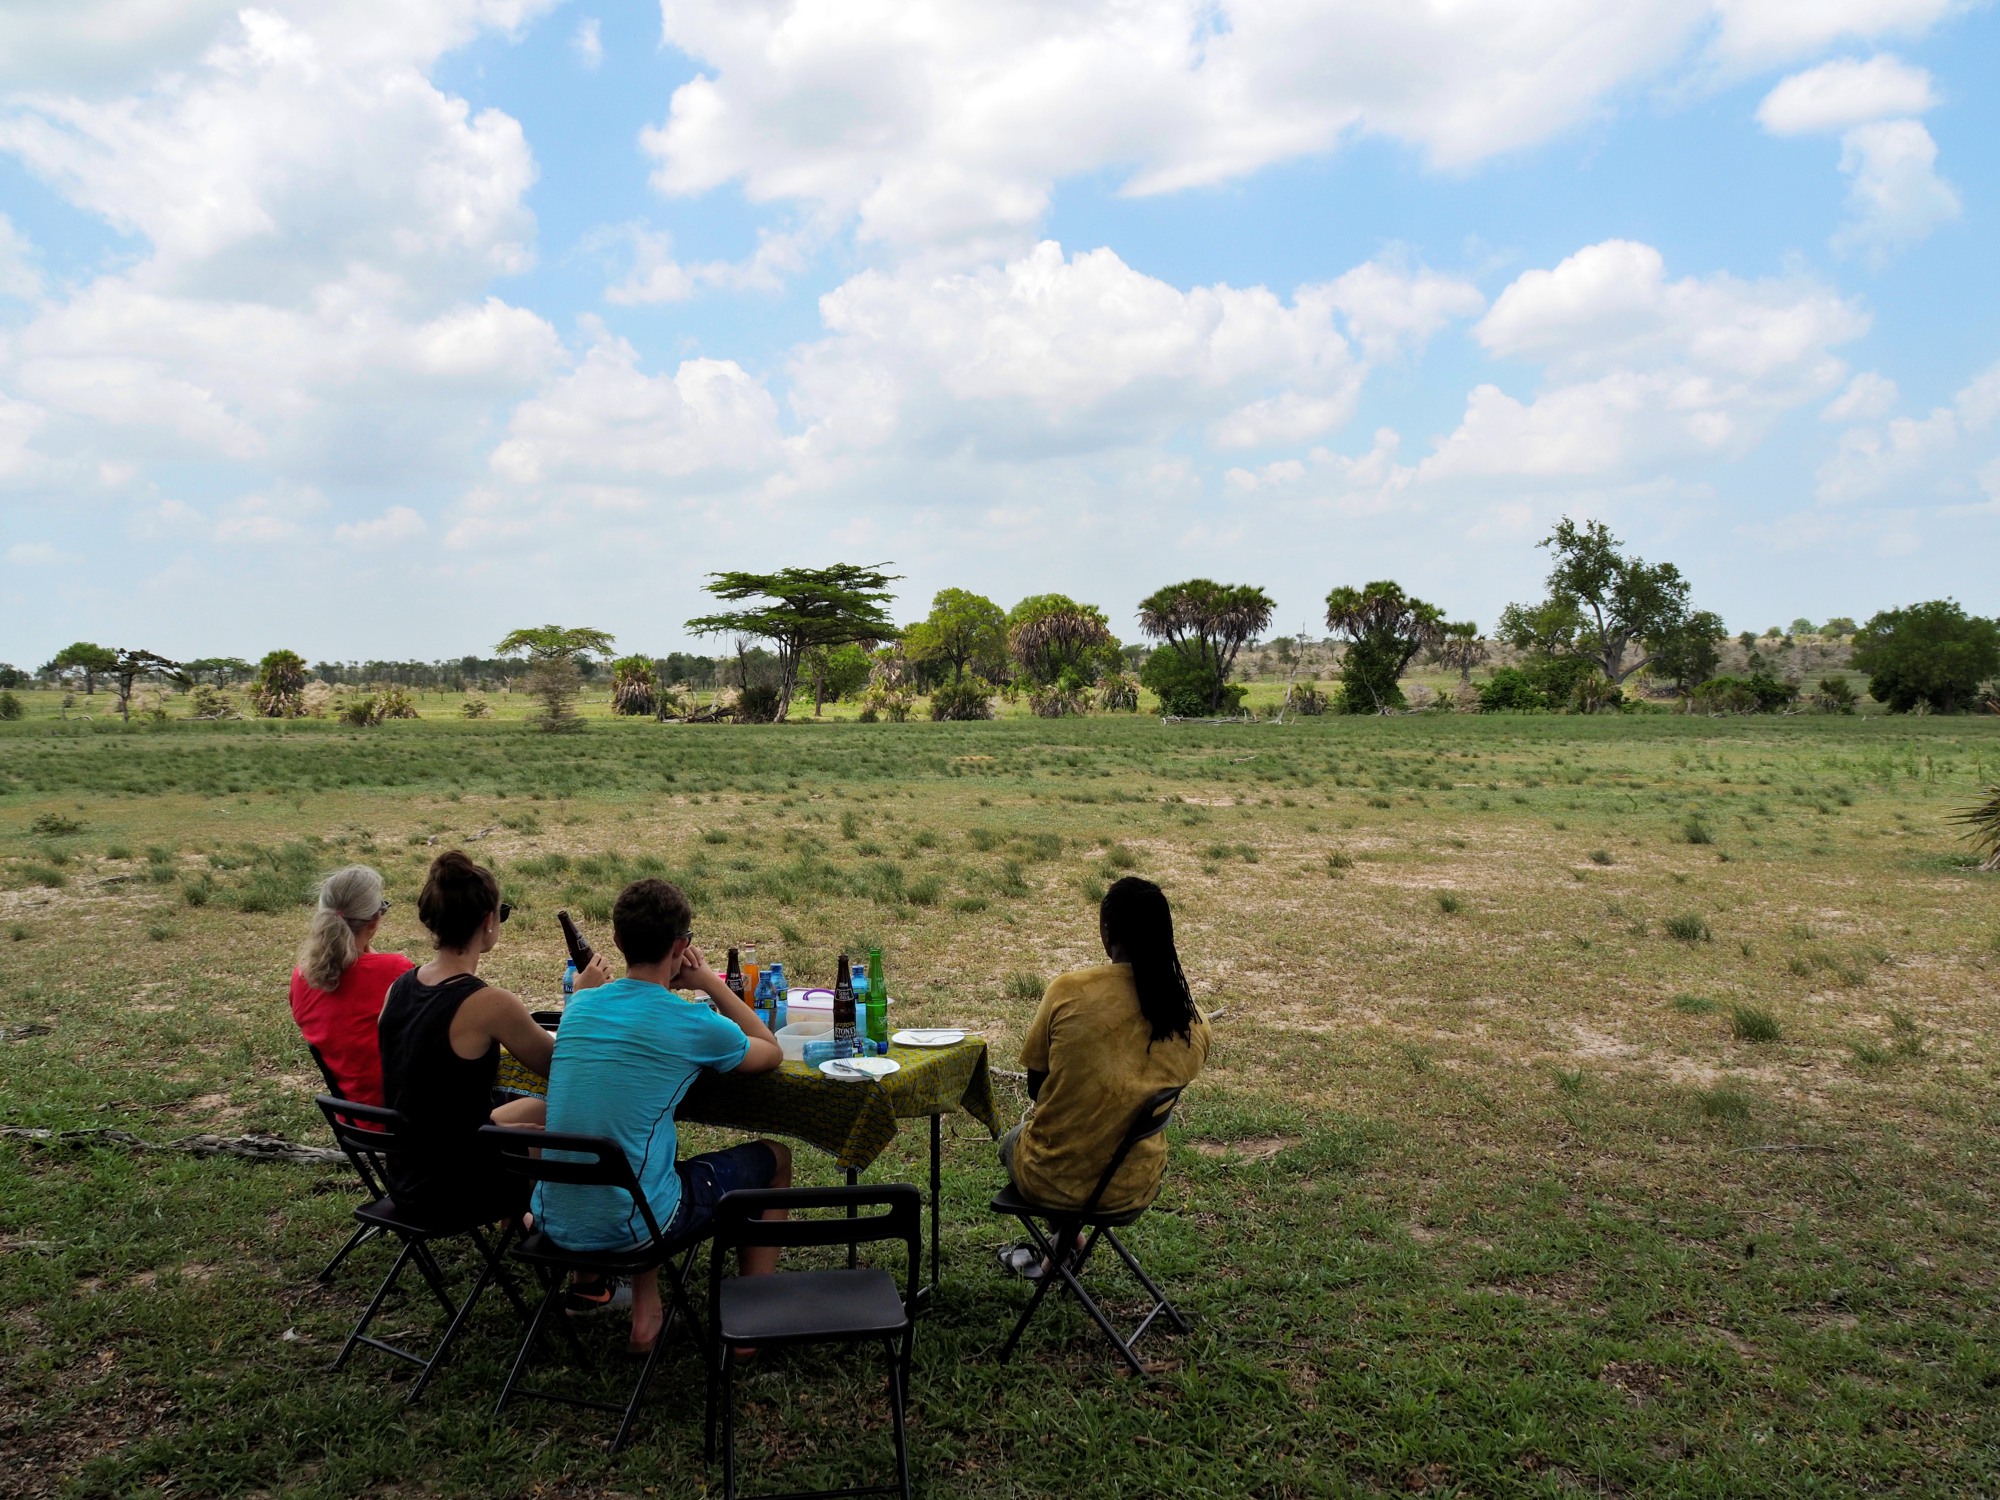 Another safari lunch... with bottles of Stoney Tangawizi